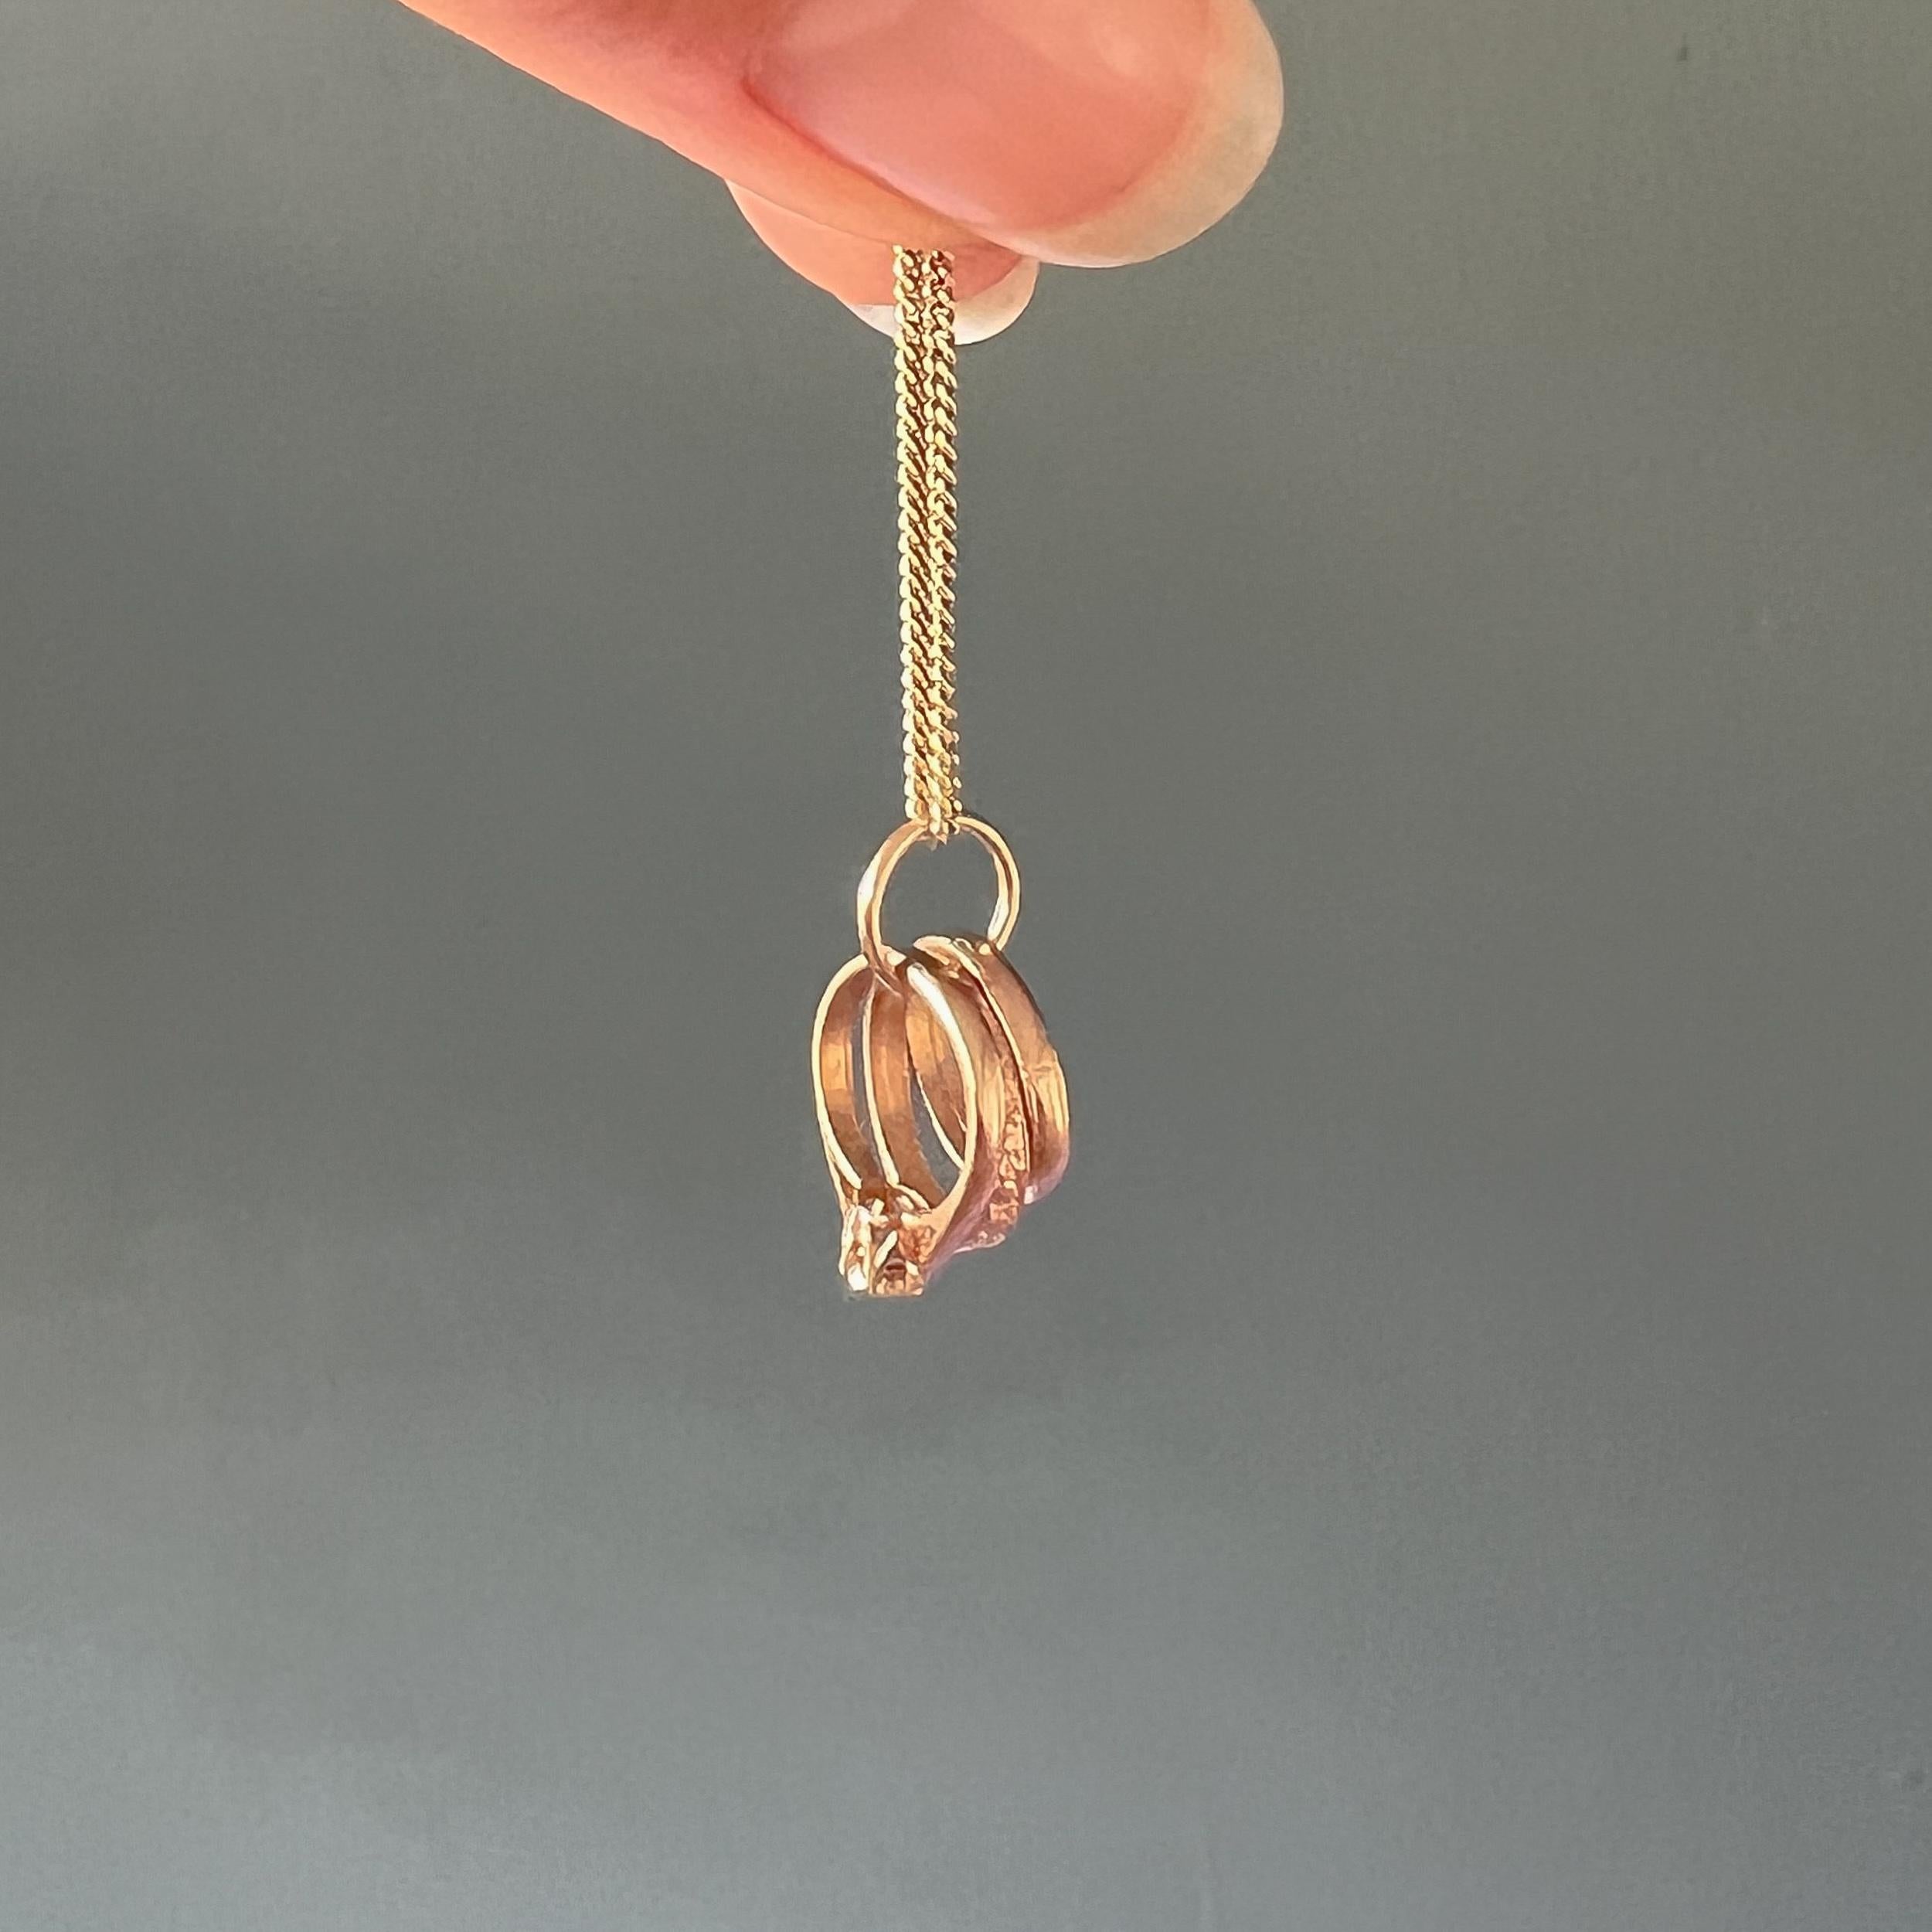 This is a vintage 9 karat yellow gold trinity rings charm pendant. This rings are nicely detailed and beautifully made with gold and yellow gold tones. The first ring has a clear stone which reminiscent of a diamond, the second ring is smooth